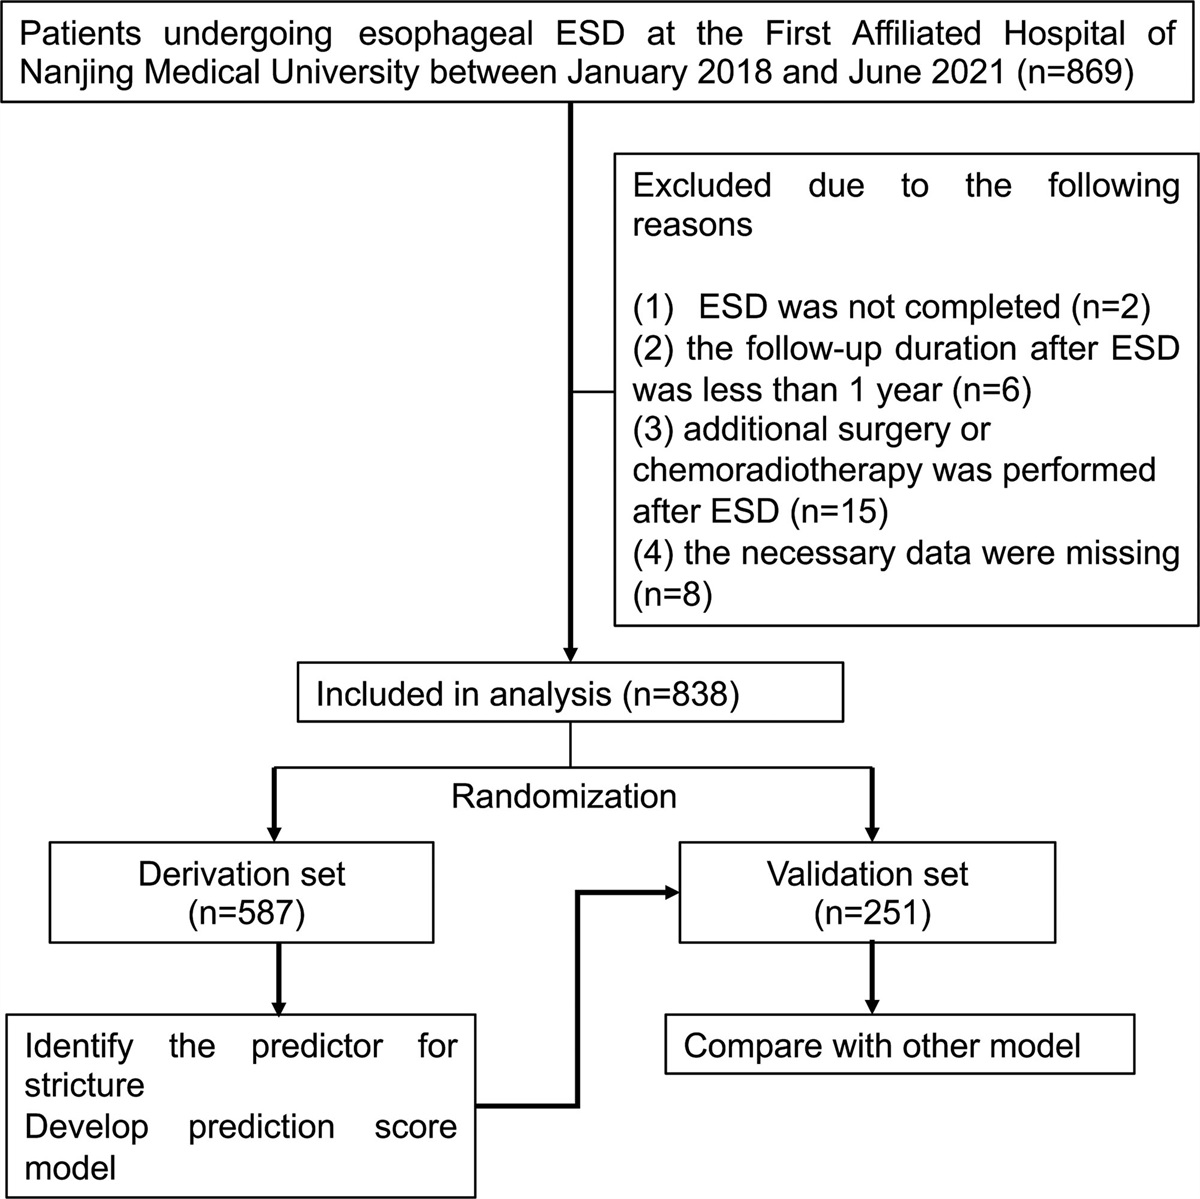 A novel risk score model of esophageal stricture for patients undergoing endoscopic submucosal dissection